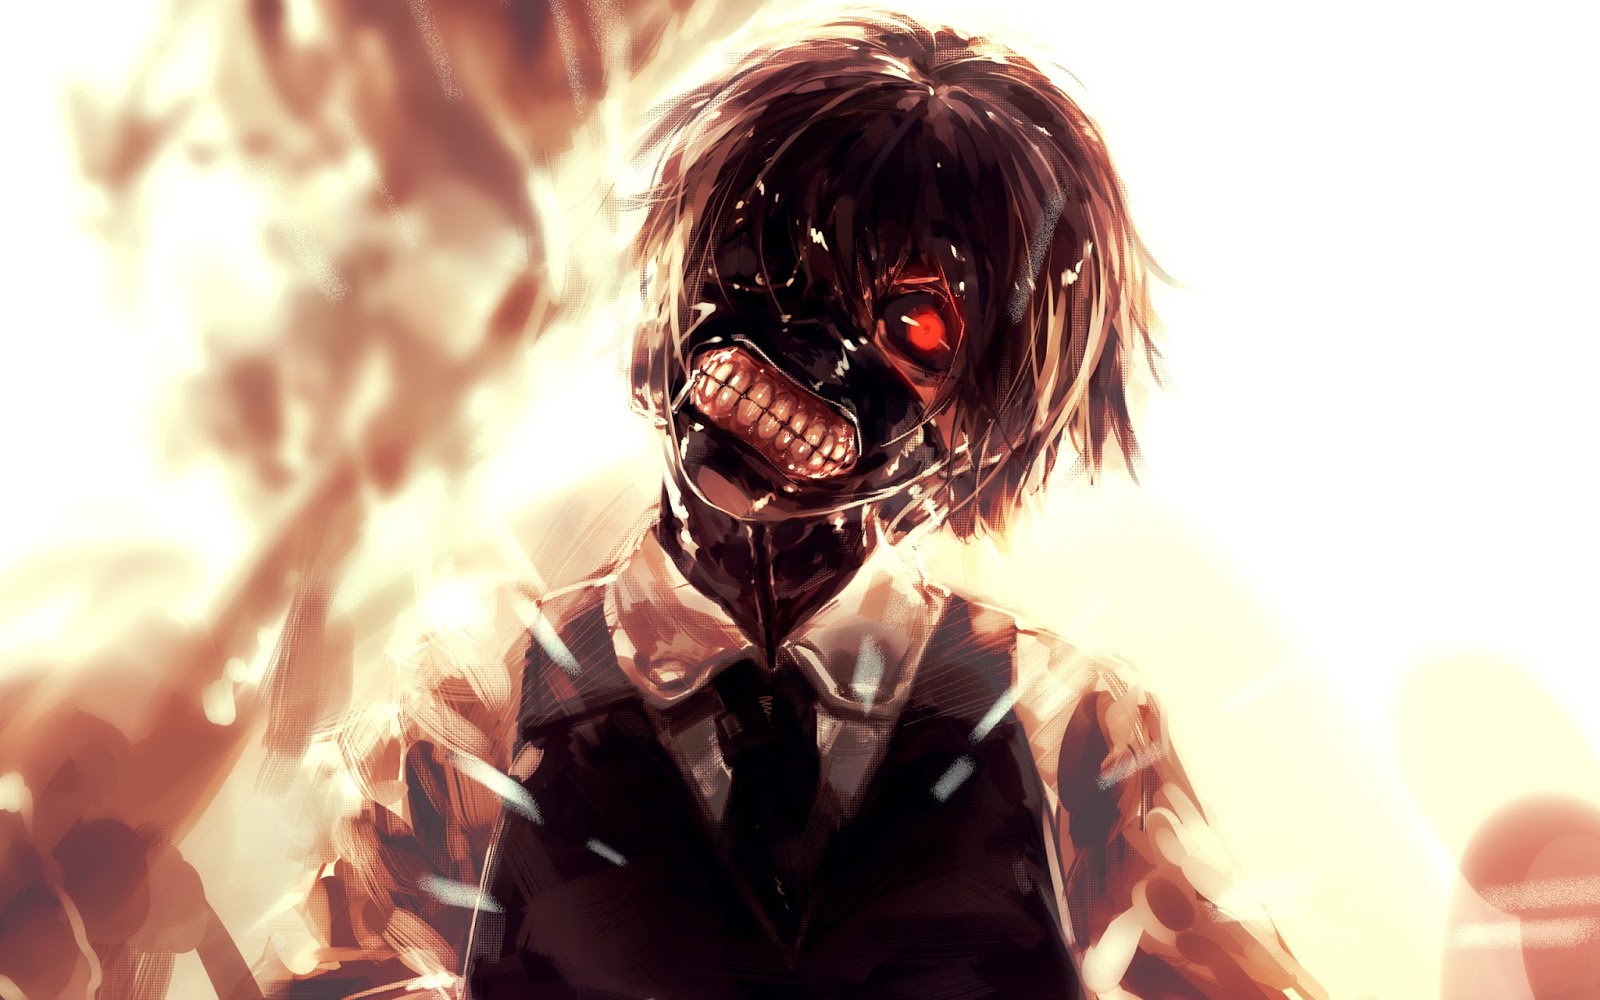 ANIME - WALLPAPER - GAMES: Tokyo Ghoul Wallpapers - ANIME